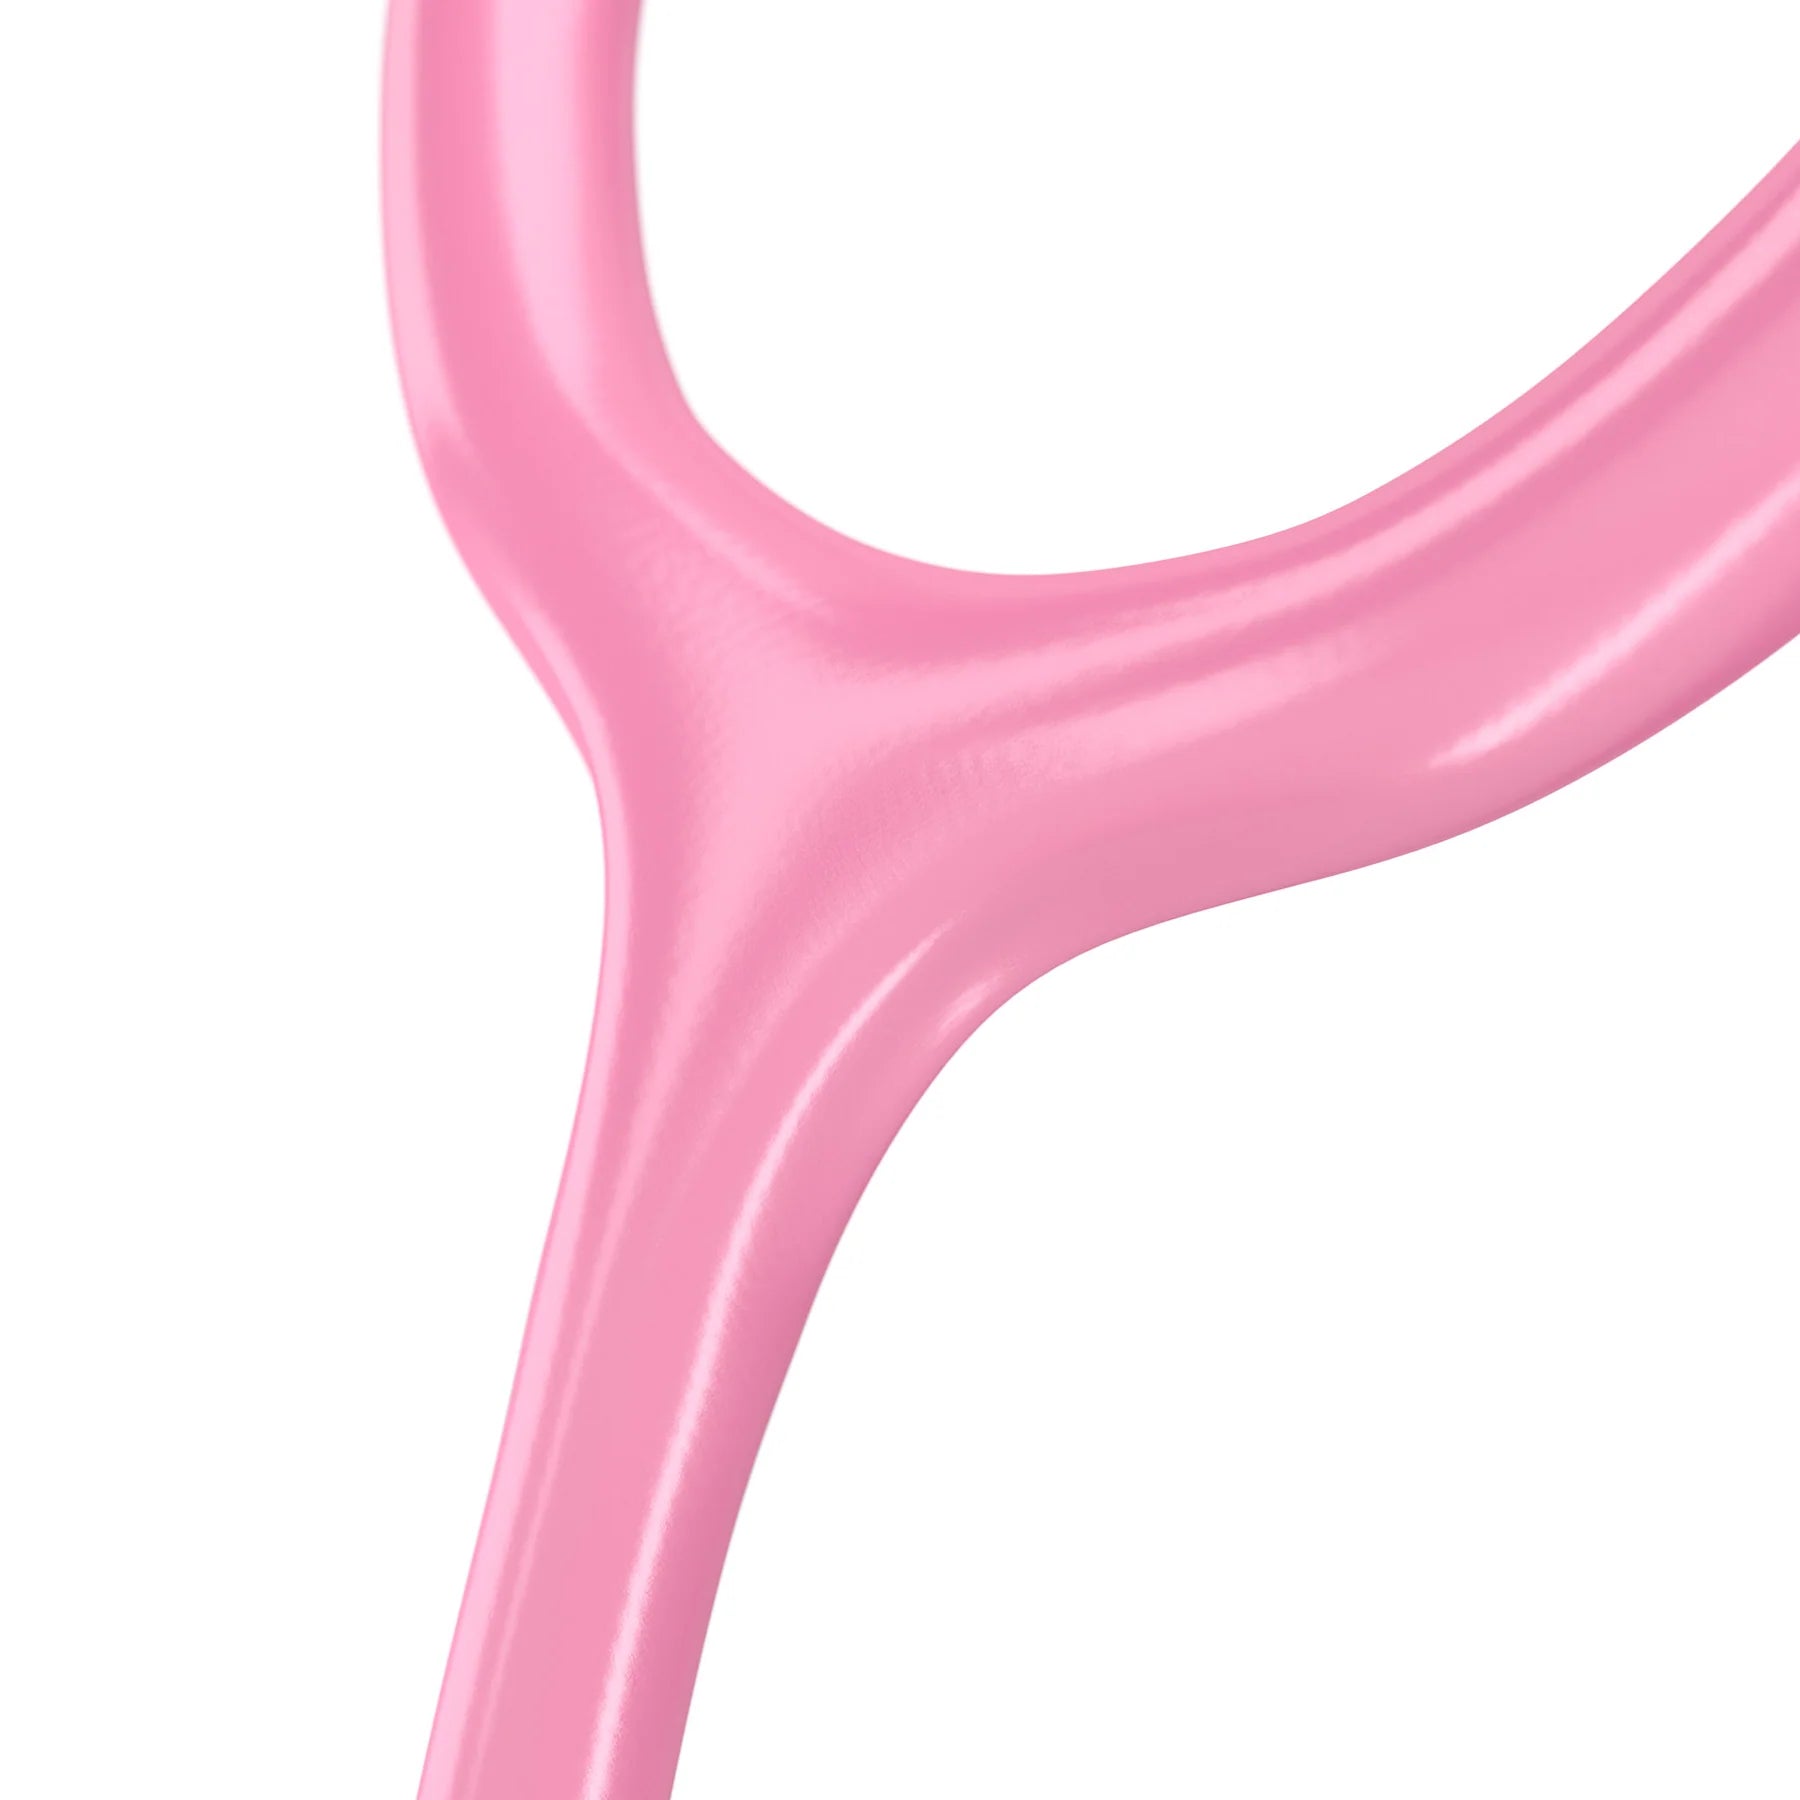 ACOUSTICA® PINK STETHOSCOPE PINKALLOY AND COSMO